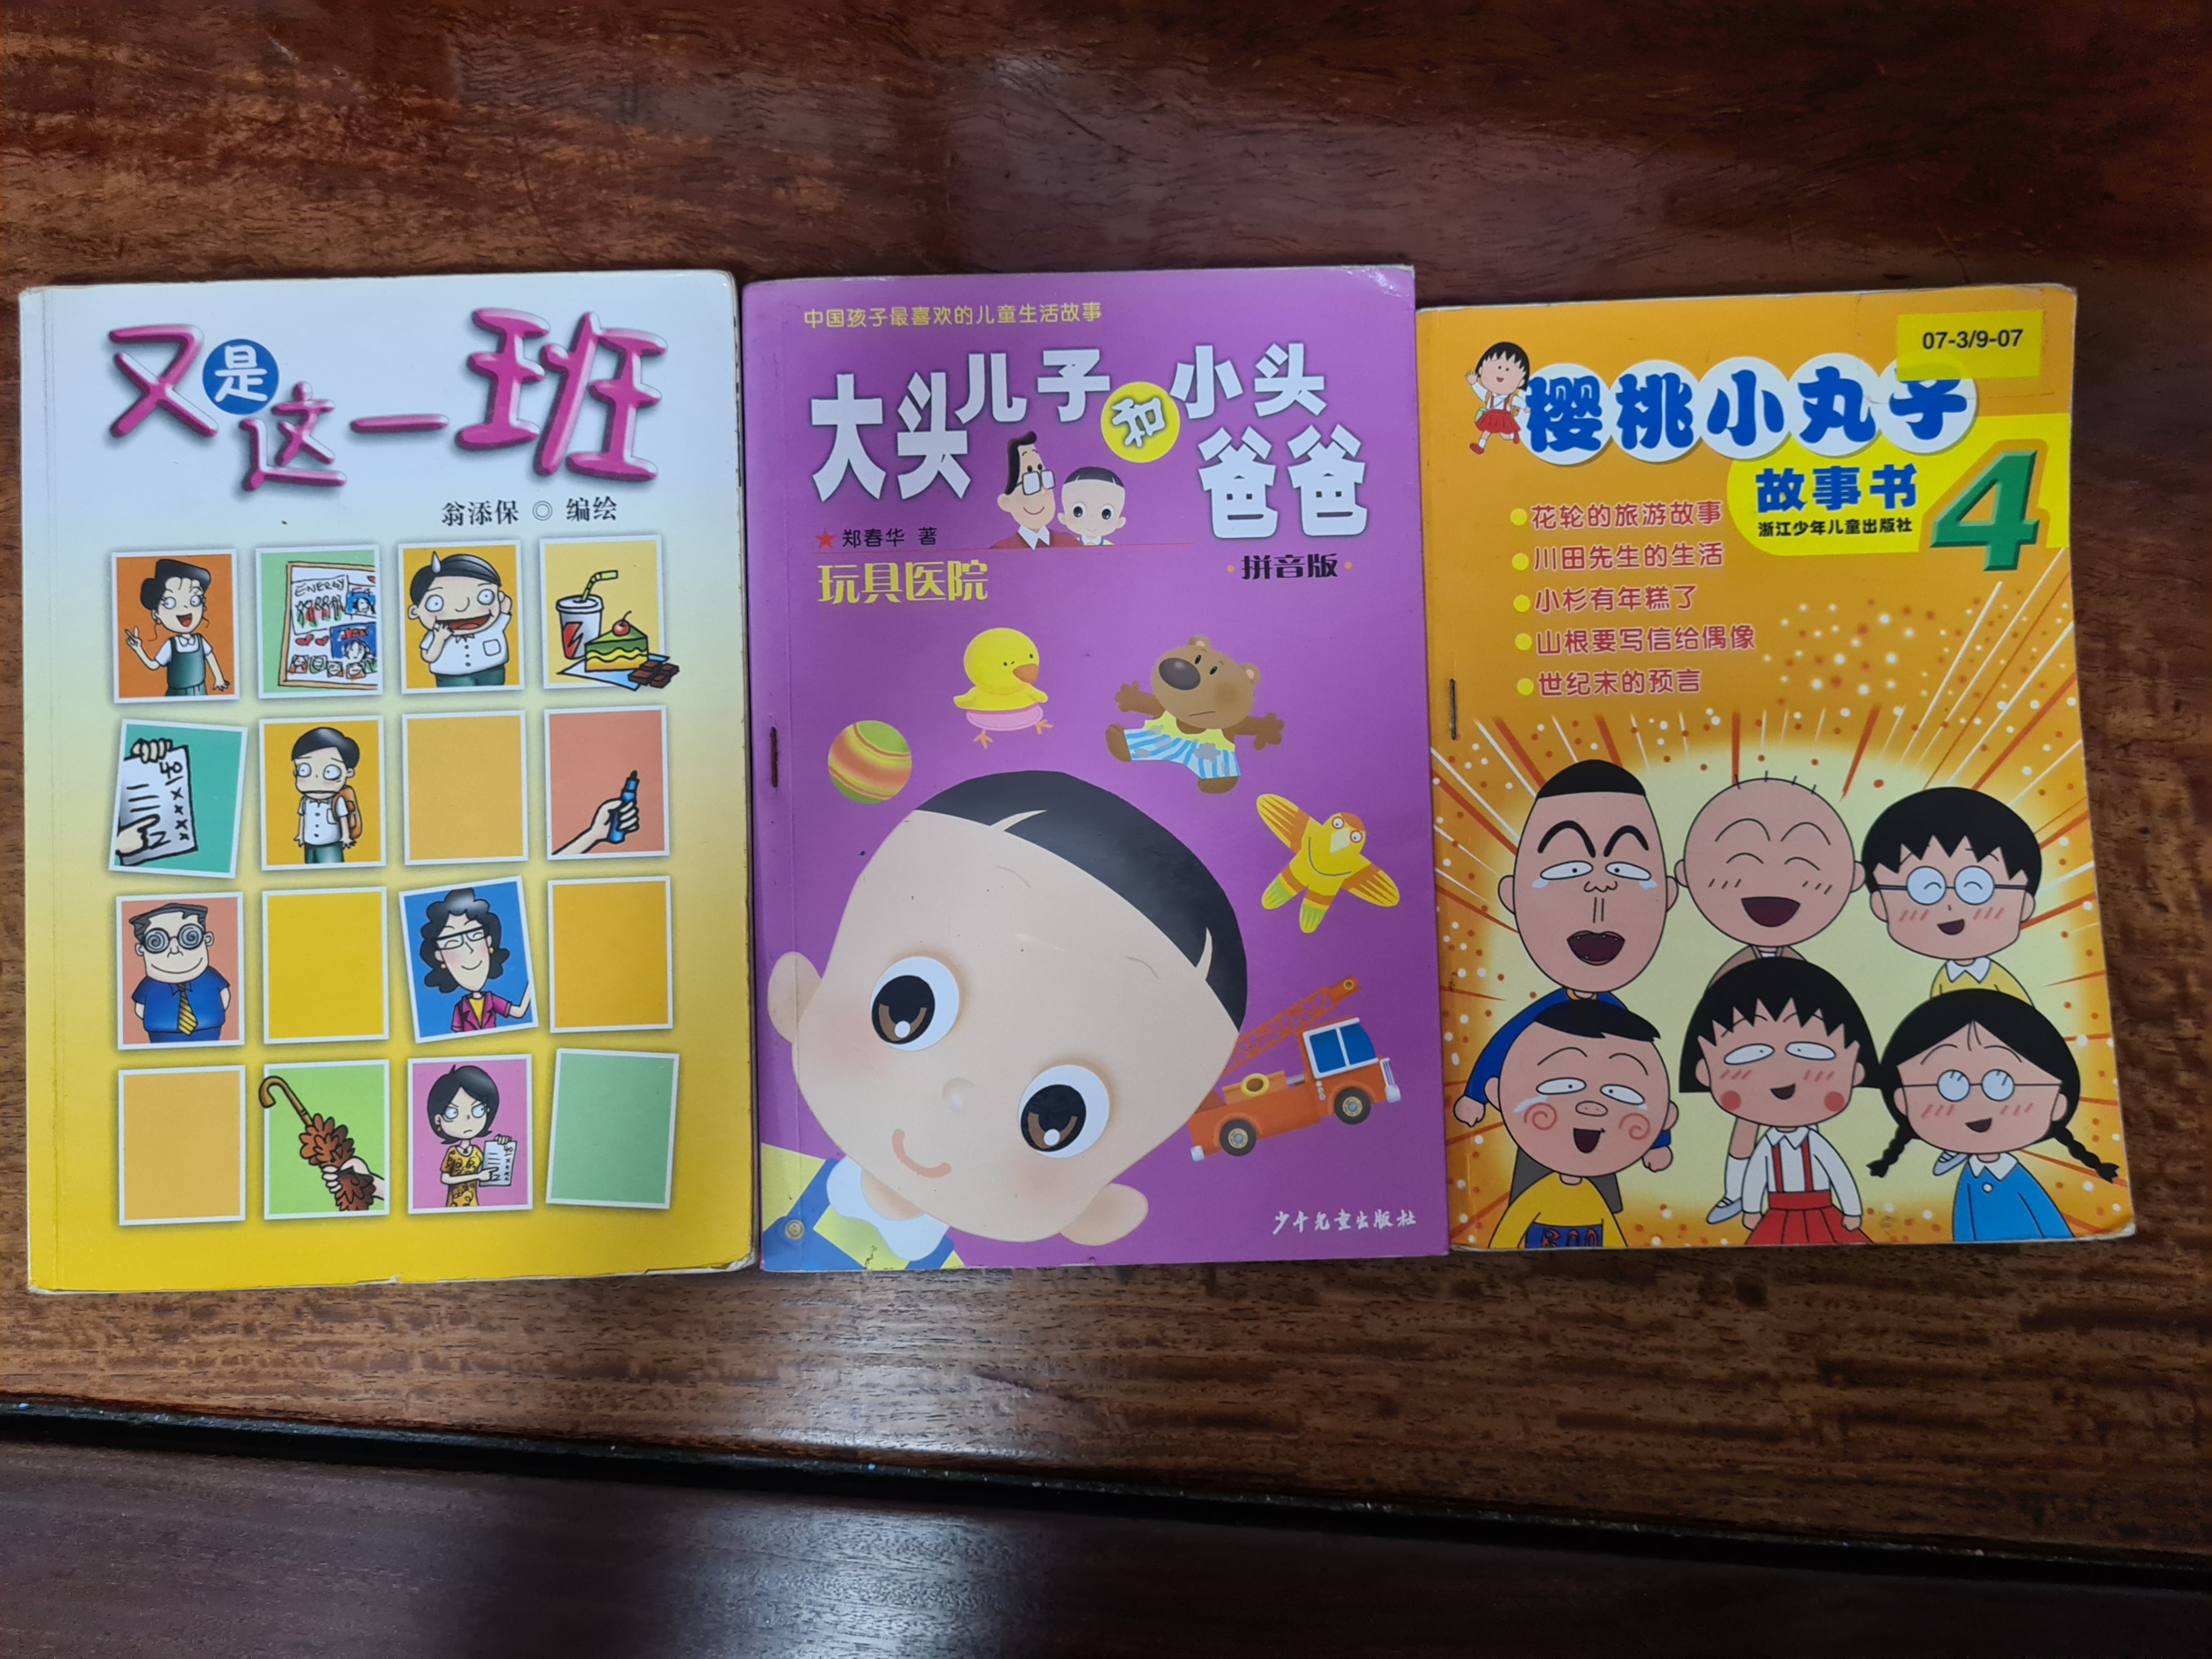 chinese-books-with-pinyin-2-each-hobbies-toys-books-magazines